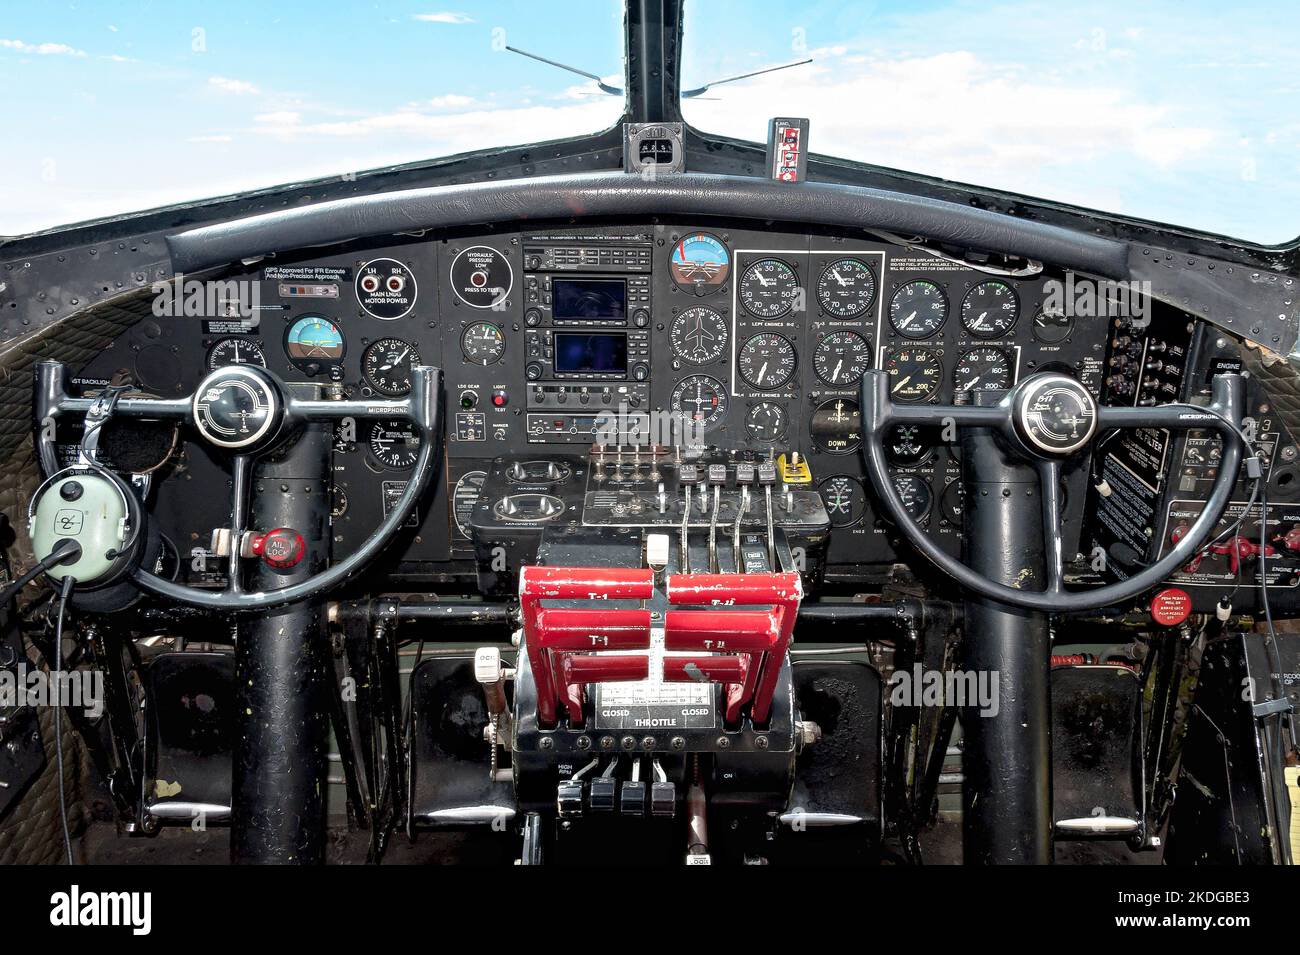 Flagstaff, Arizona, USA - April 05 2011 - Cockpit view of the instrument panel of a B17 Flying Fortress Bomber Aluminum Overcast USAF WWII Aircraft du Stock Photo